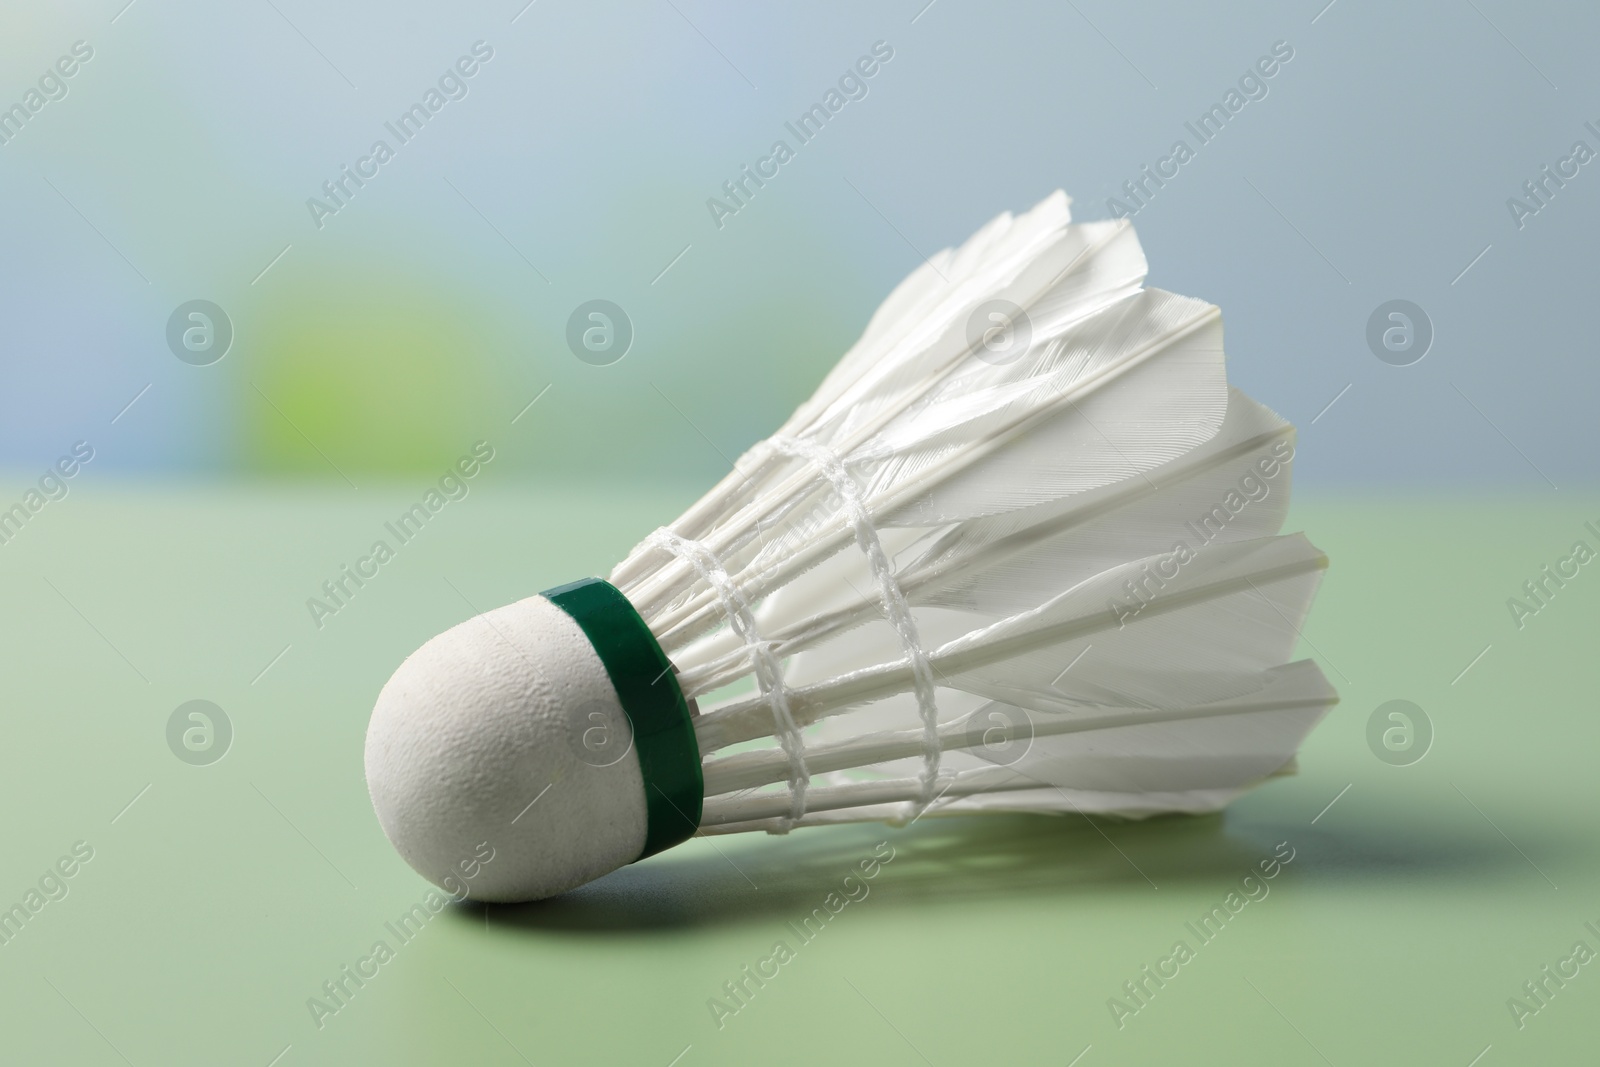 Photo of Feather badminton shuttlecock on green table against blurred background, closeup